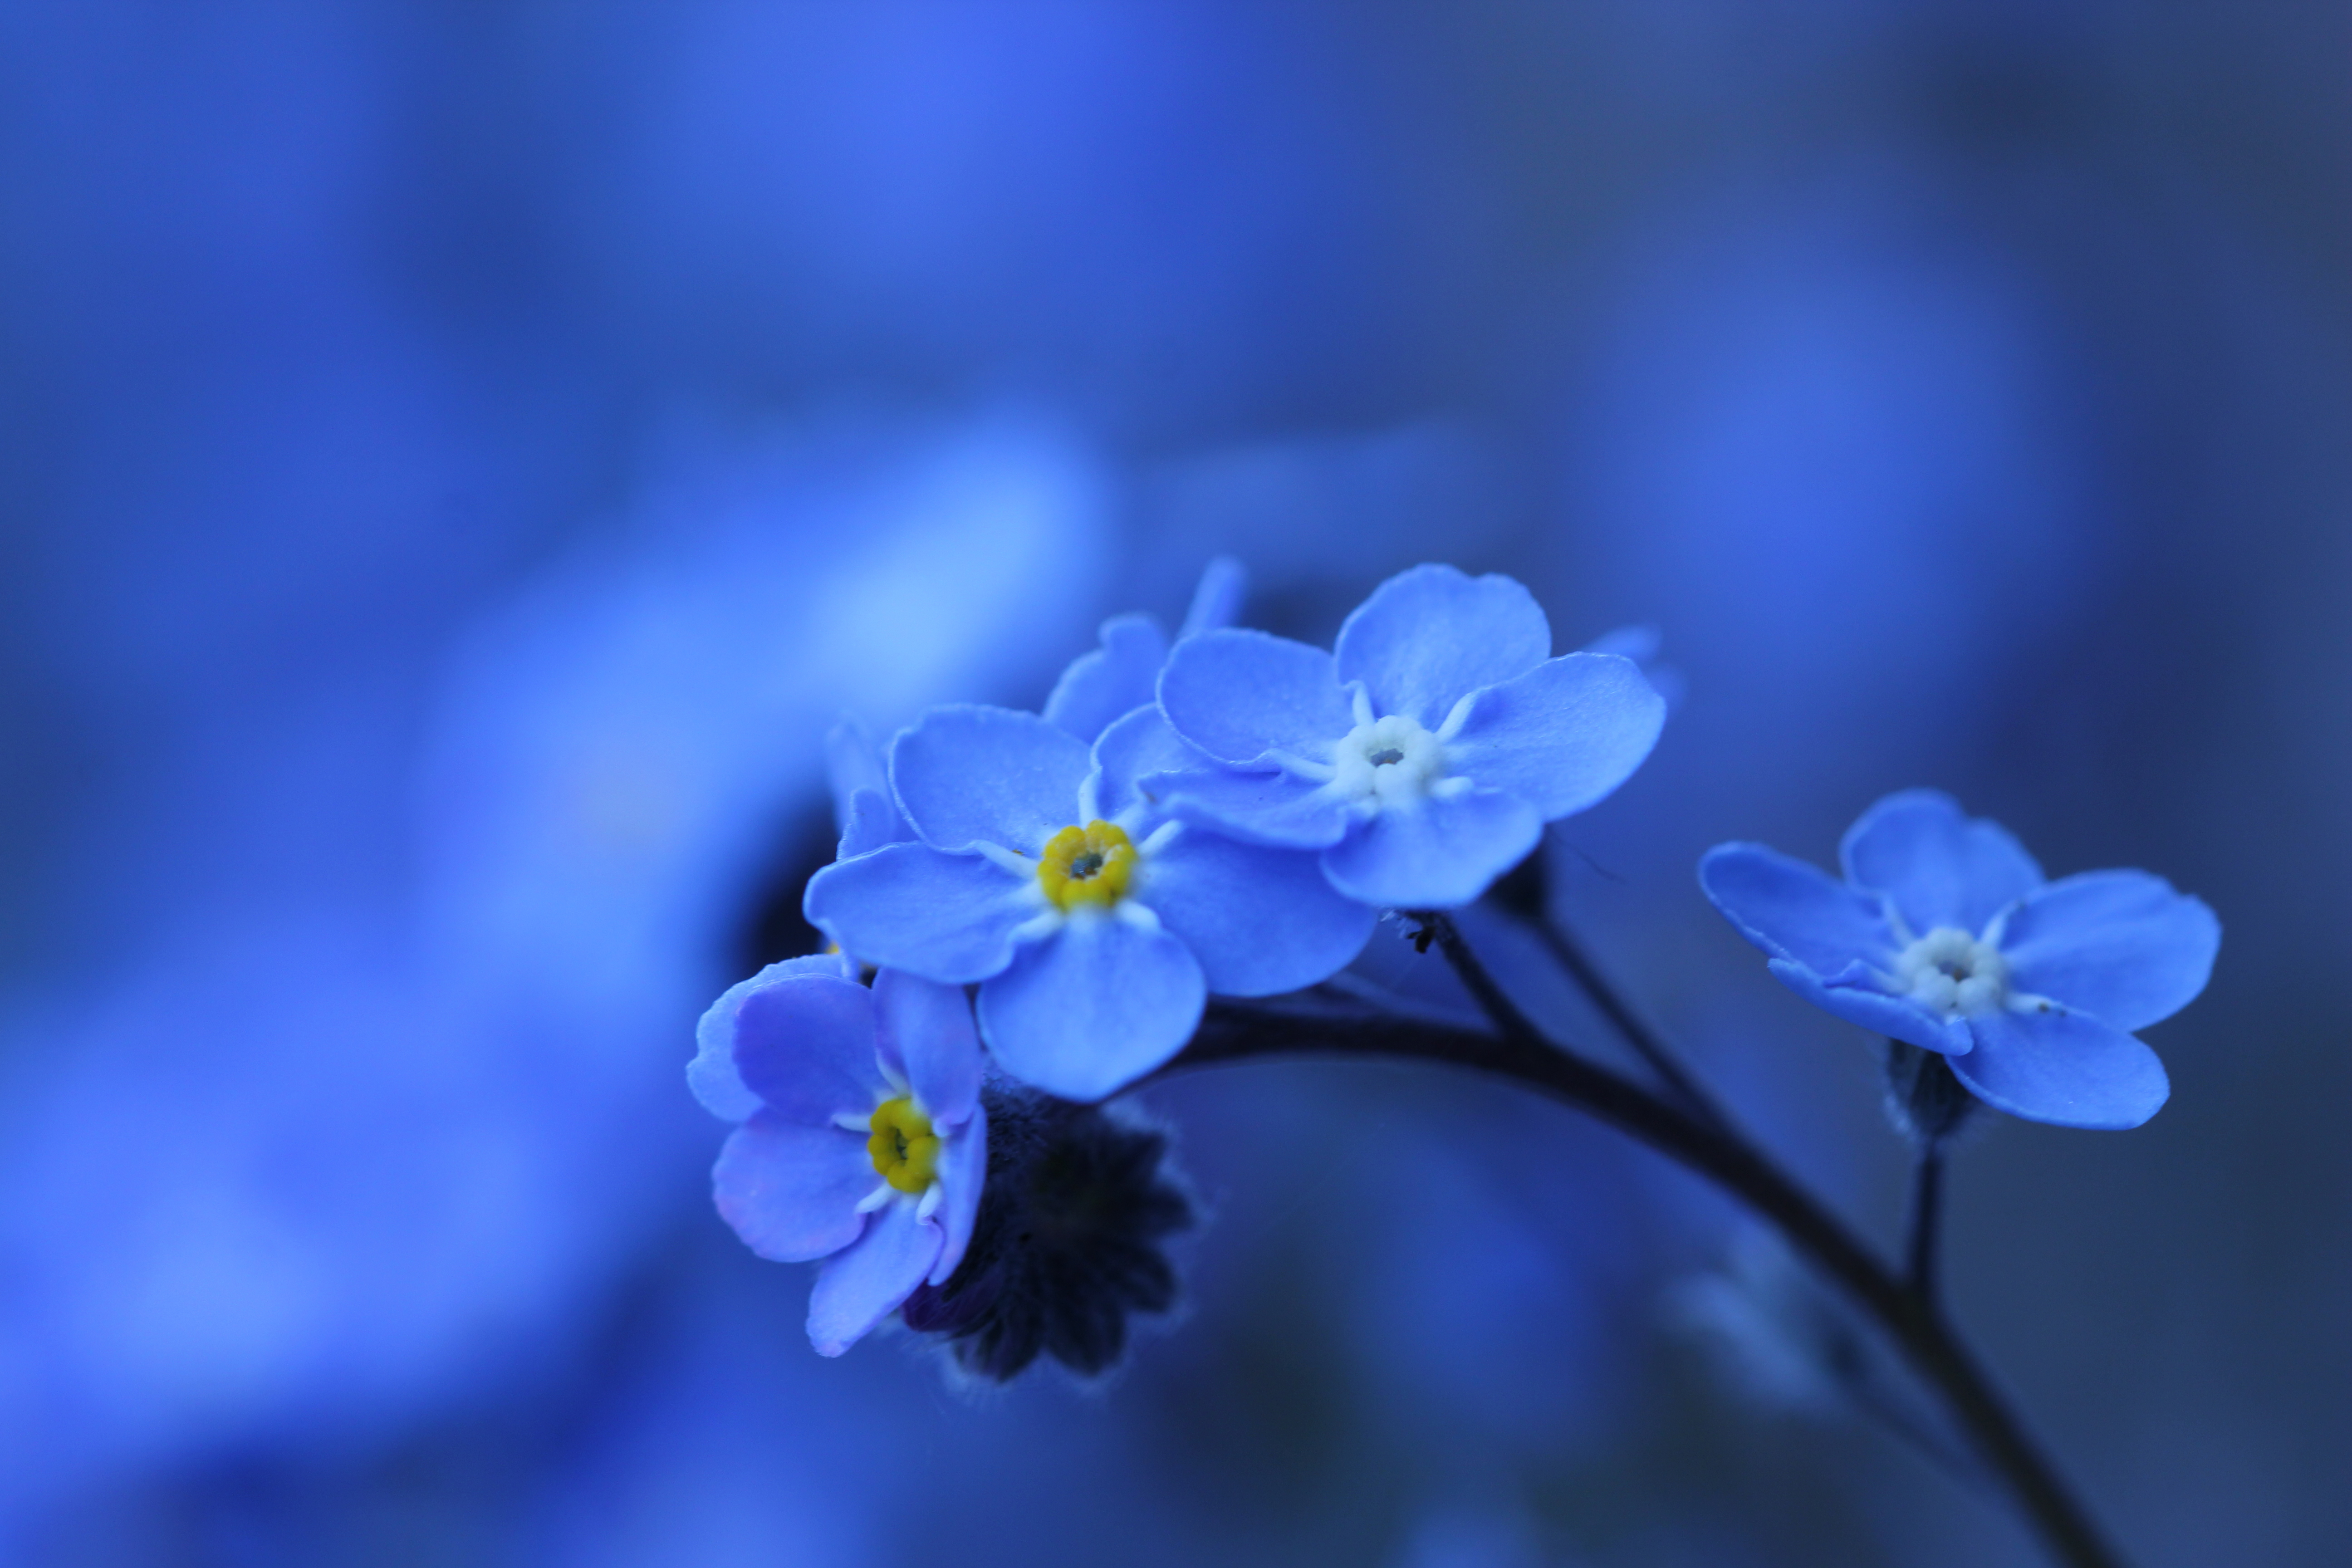 Nature Forget-Me-Not 4k Ultra HD Wallpaper